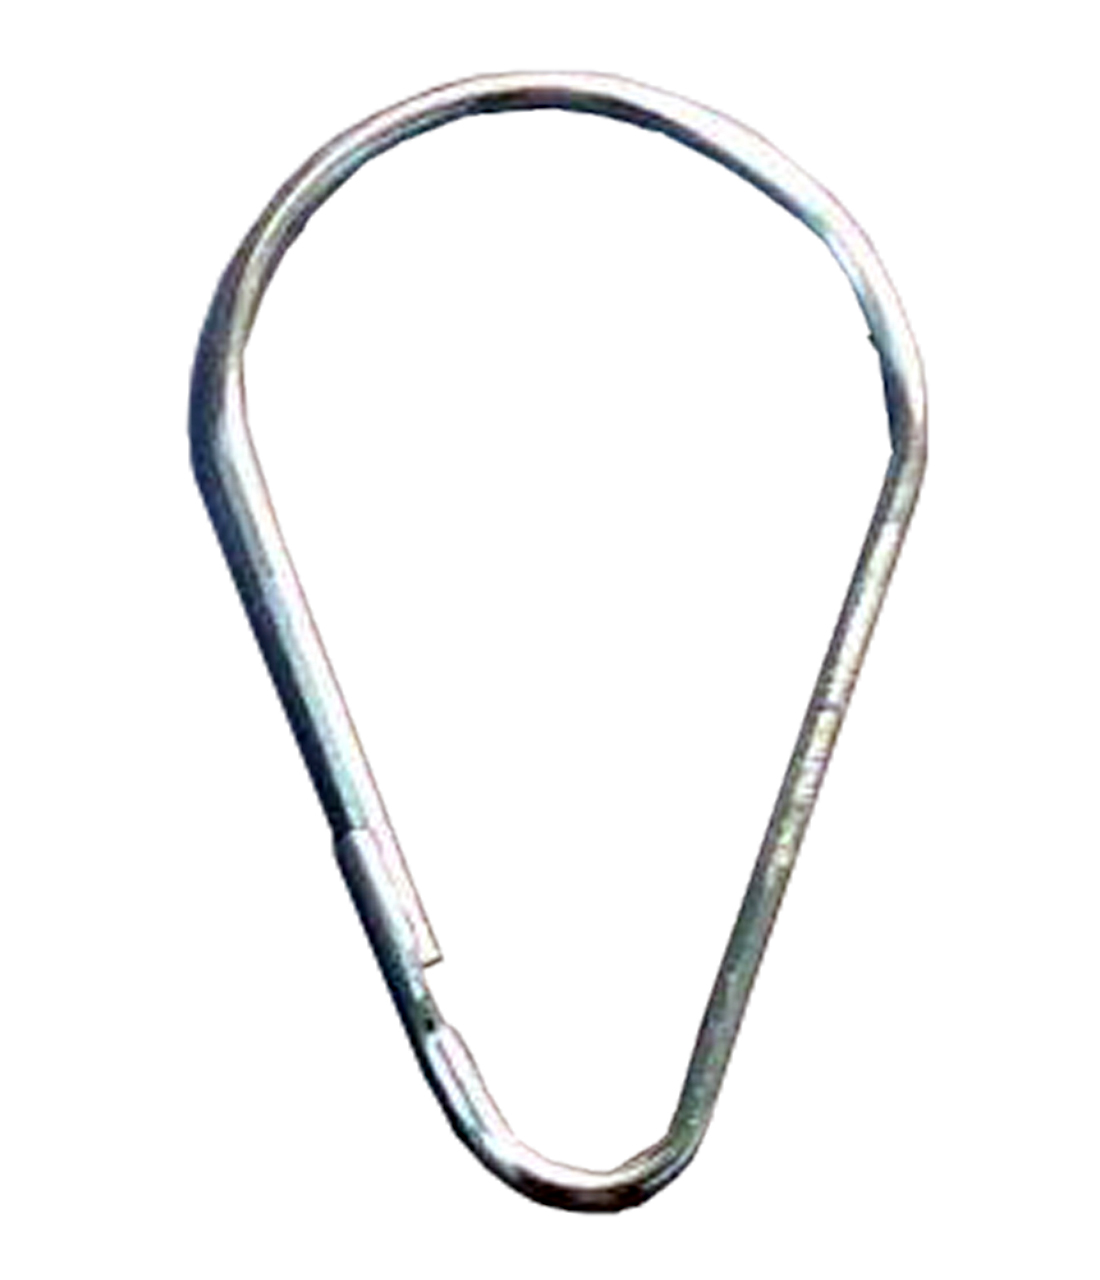 Stainless Steel Curtain Hook - (Model #: 100chss)-image